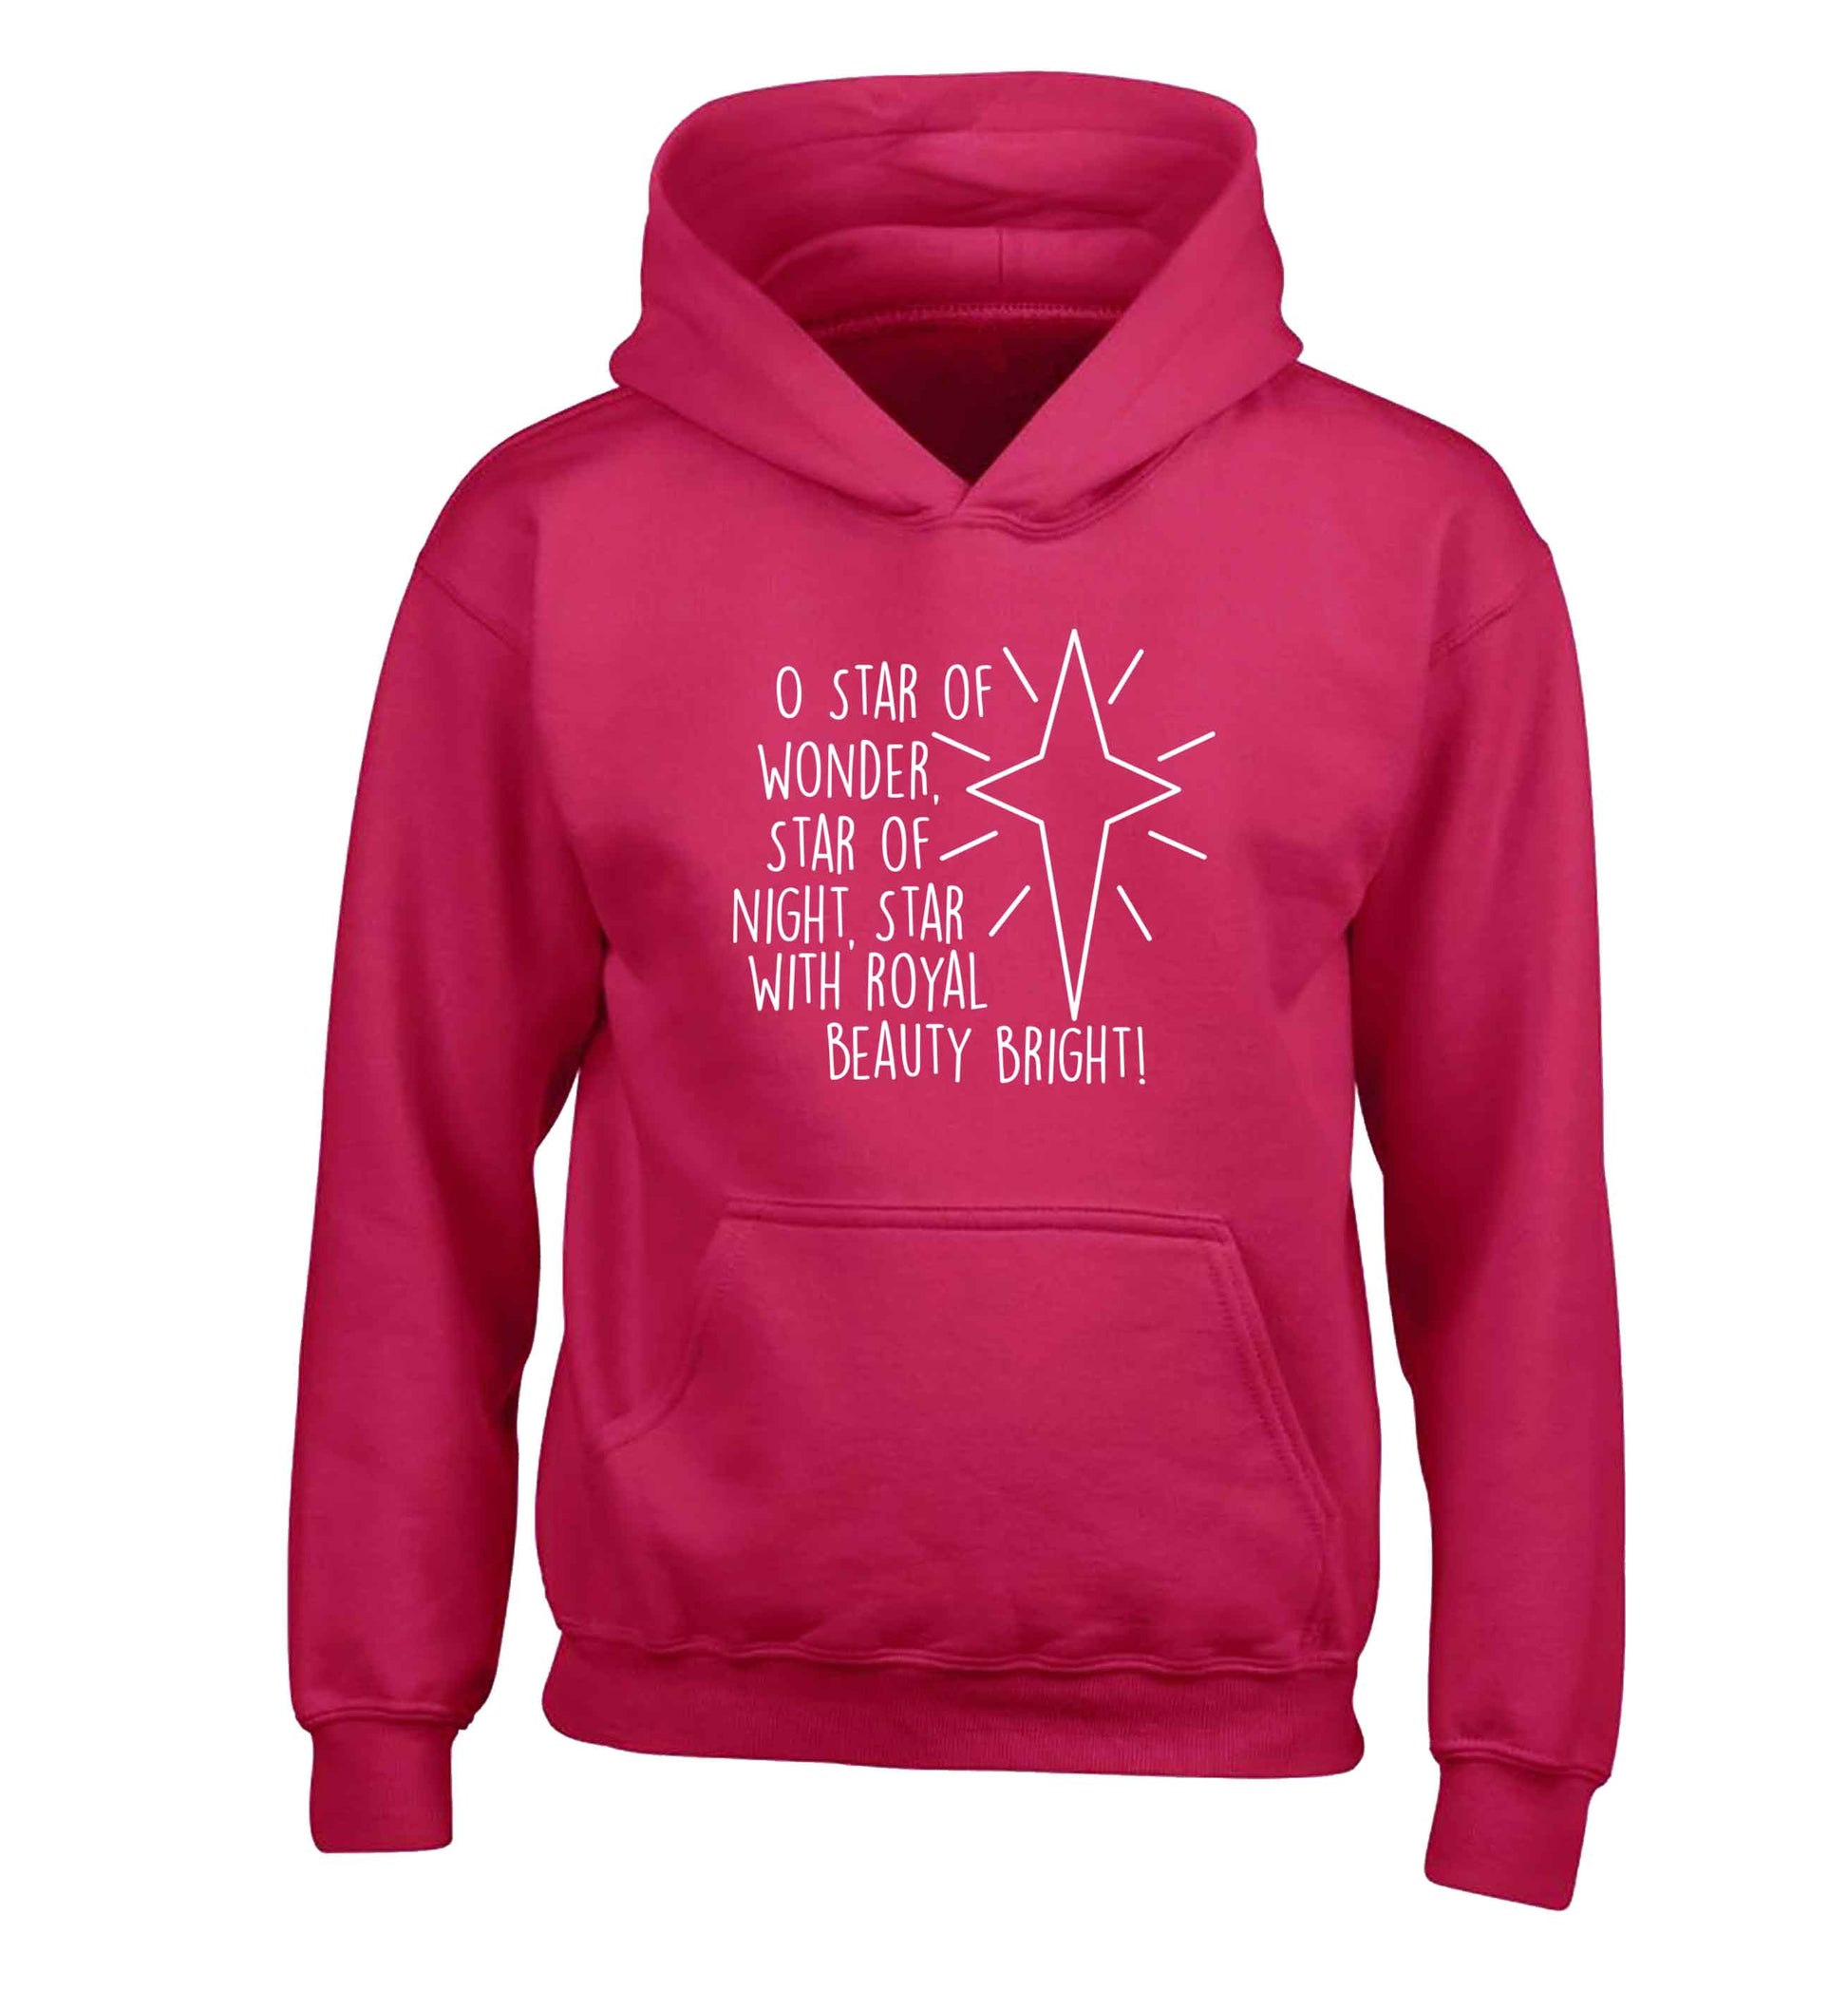 Oh star of wonder star of night, star with royal beauty bright children's pink hoodie 12-13 Years